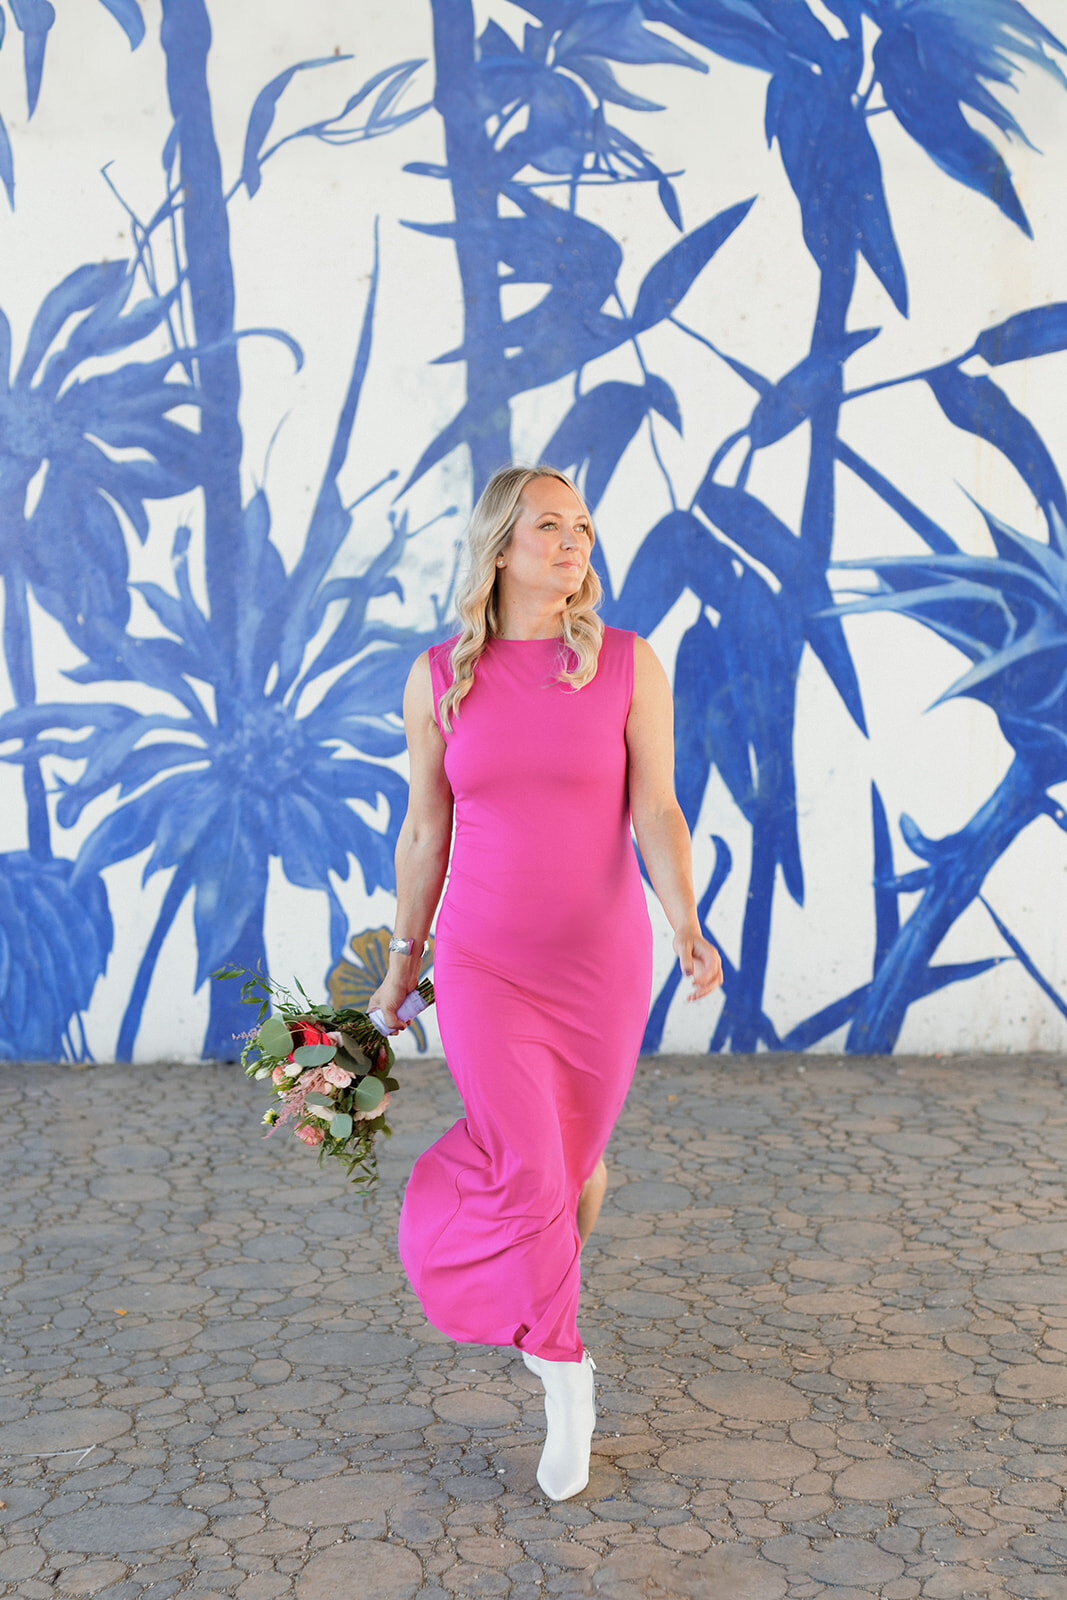 blonde woman walks in fitted pink dress toward the camera in front of a blue floral mural. She holds a pink and red bouquet and looks off to the side.